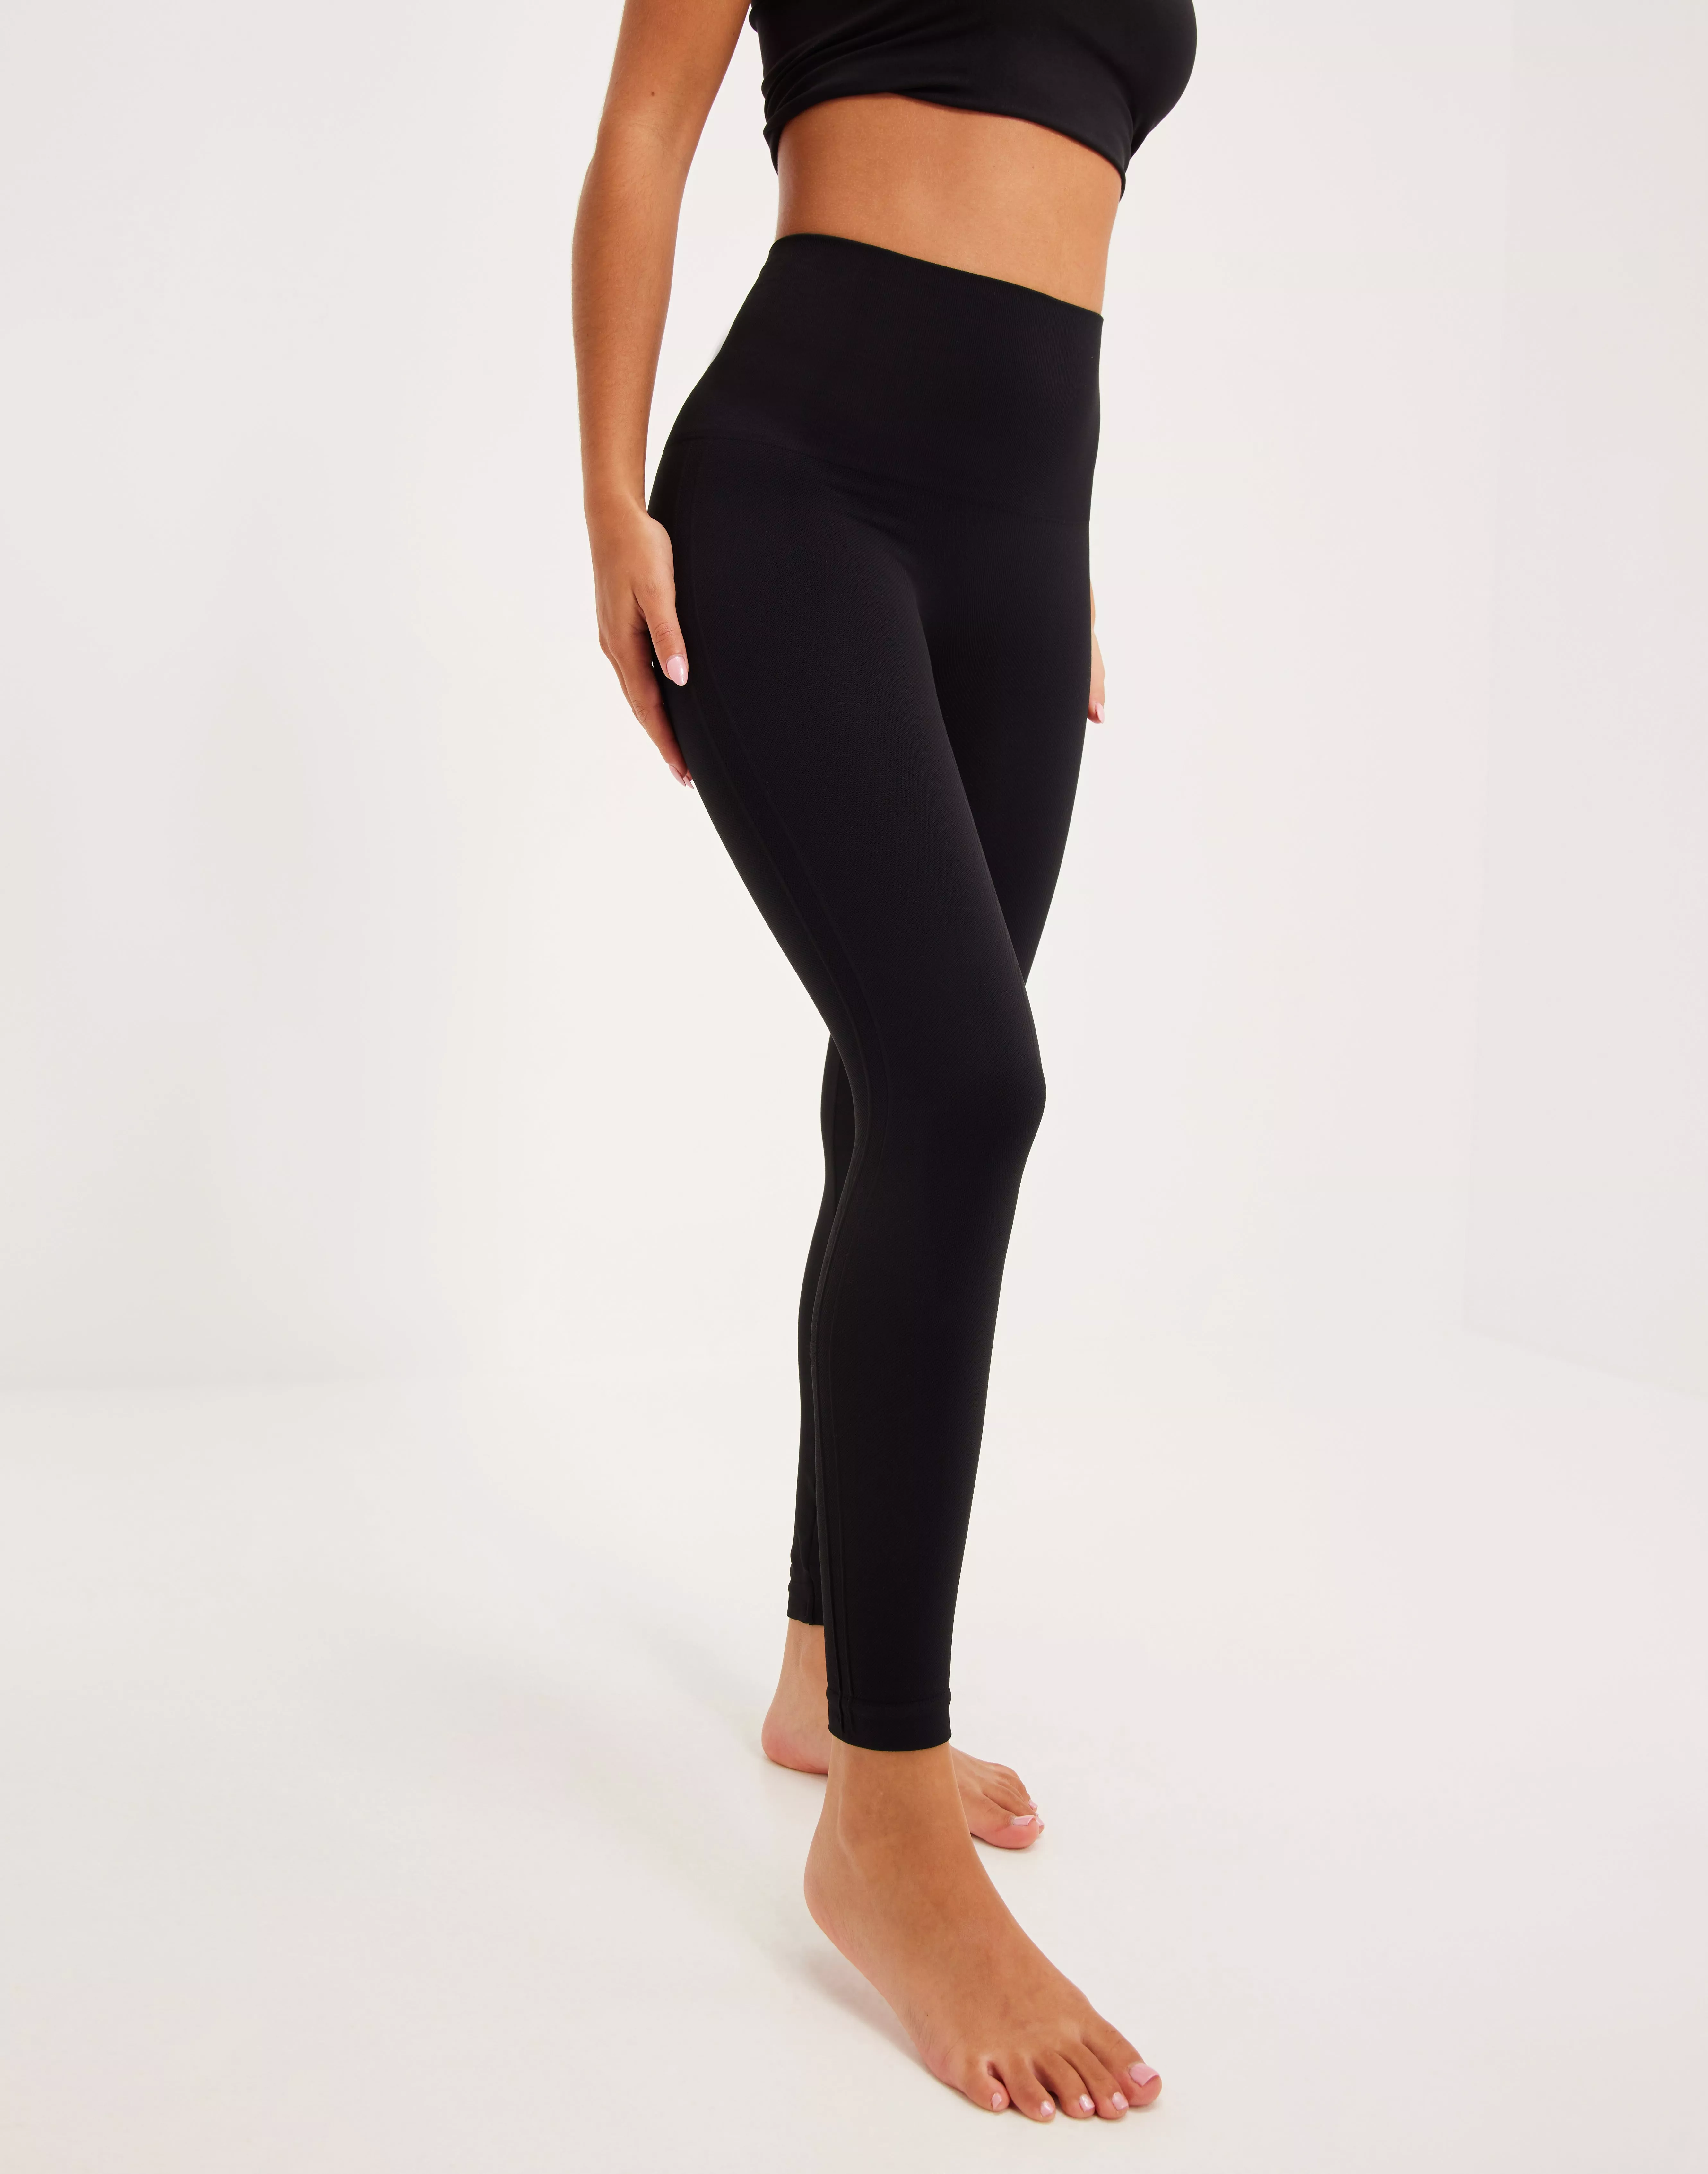 Hue snakeskin scale extra small stretch leggings Size XS - $14 - From  Melinda